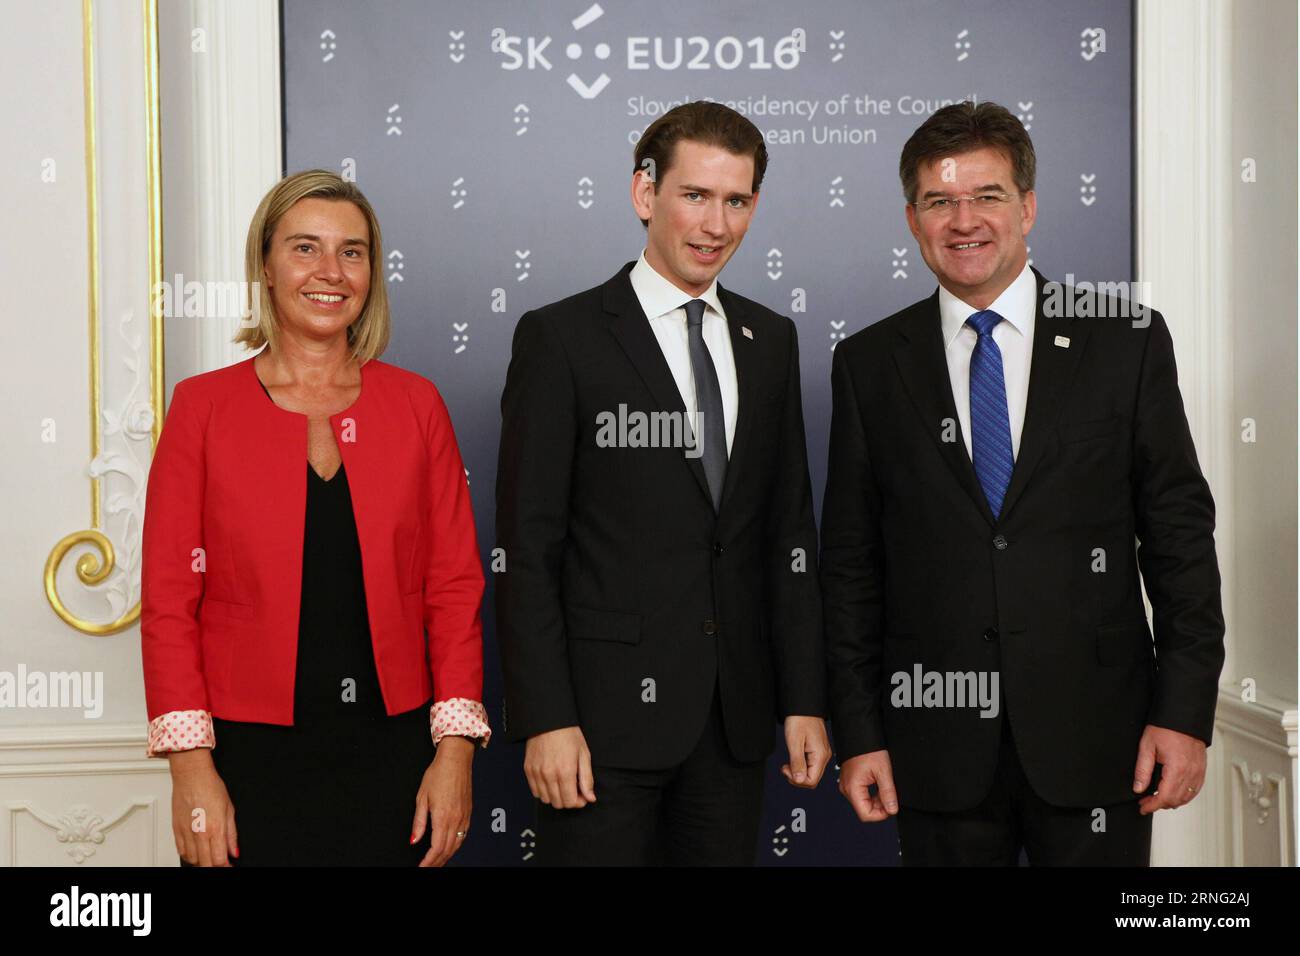 (160902) -- BRATISLAVA, Sept.2, 2016 -- Slovak Minister of foreign and European Affairs Mirislav Lajcak (R) and European Union (EU) High Representative for Foreign Affairs and Security Policy Federica Mogherini (L) welcome Austrian Federal Minister for Europe, Integration and Foreign Affairs Sebastian Kurz before the informal meeting of foreign affairs ministers, also known as Gymnich, in Bratislava, capital of Slovakia, Sept. 2, 2016. The current issues of global foreign and security policy will be high on the agenda of Gymnich, which kicked off on Friday. ) SLOVAKIA-BRATISLAVA-EU FM MEETING Stock Photo